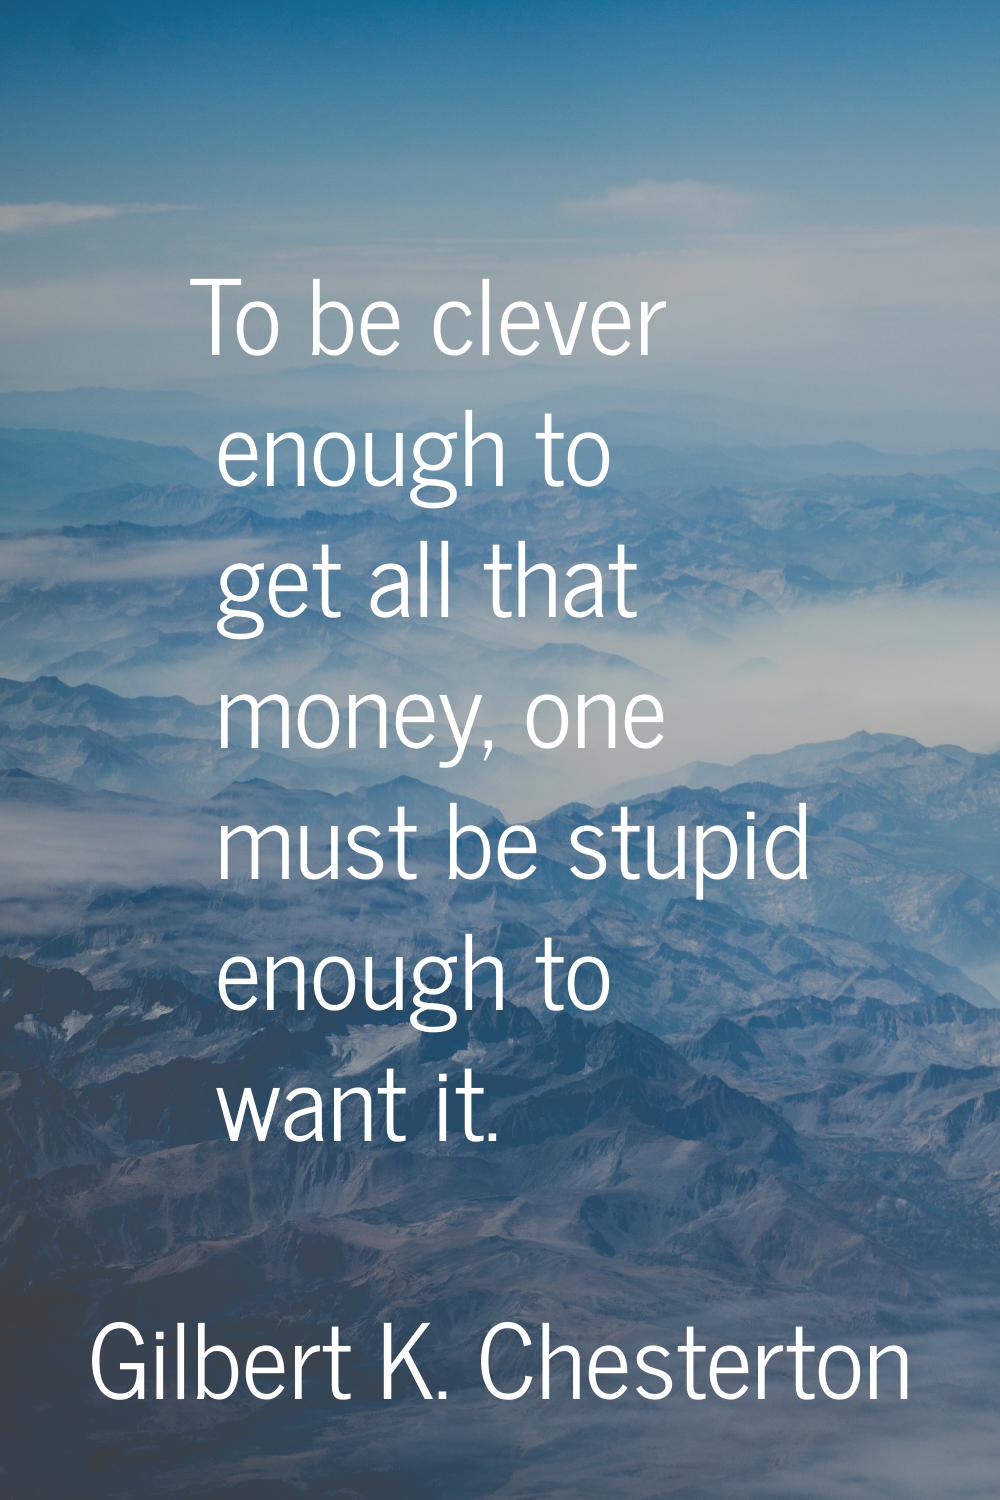 To be clever enough to get all that money, one must be stupid enough to want it.